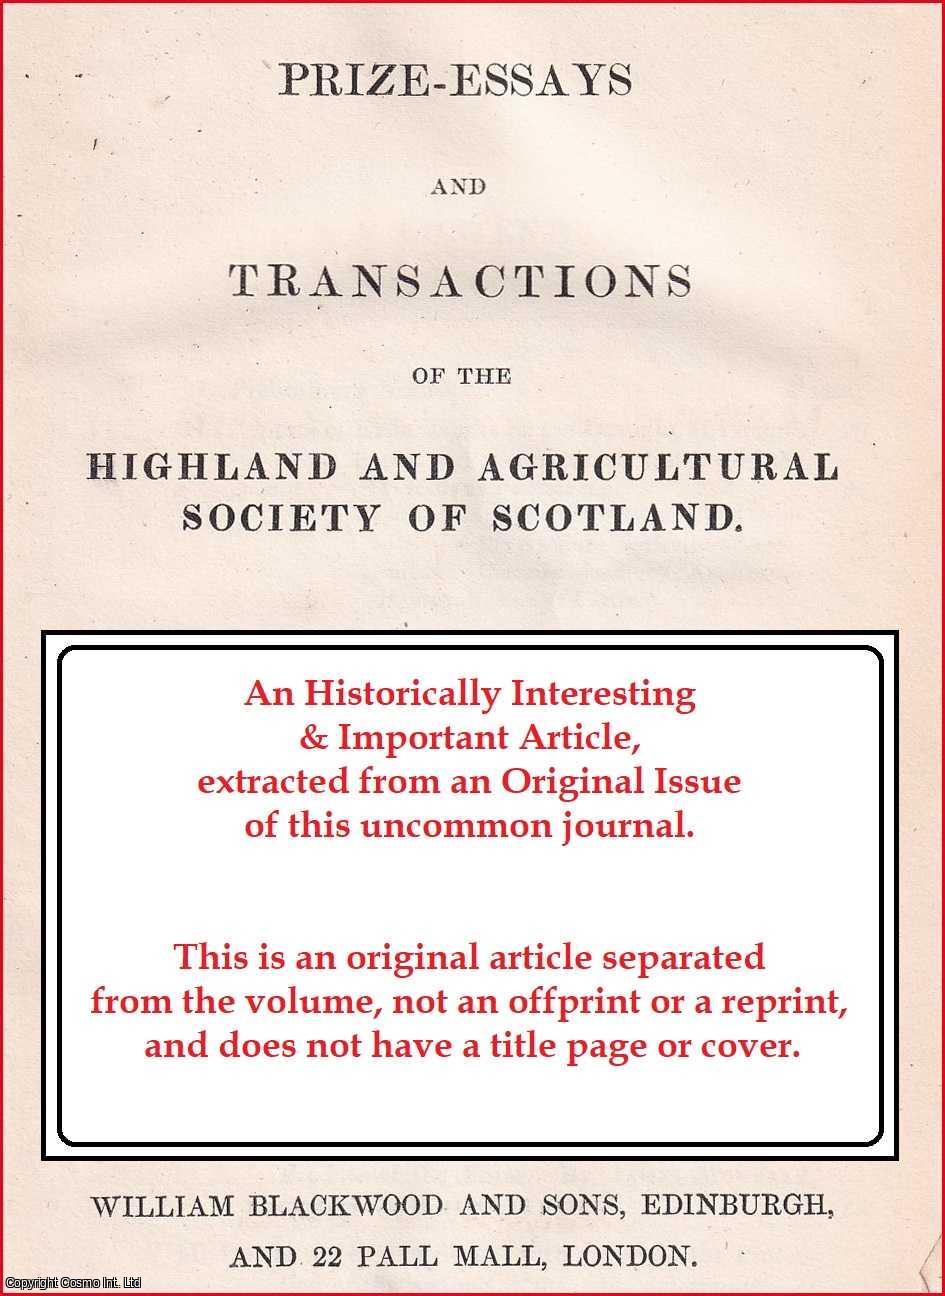 John Yule, Esq. Glingerbank. - The Mode of Draining, by Means of Tiles, as Practised on the Estate of Netherby, in Cumberland, the Property of Sir James Graham, Bart. M.P. An uncommon original article from the Prize Essays and Transactions of the Highland Society of Scotland, 1829.